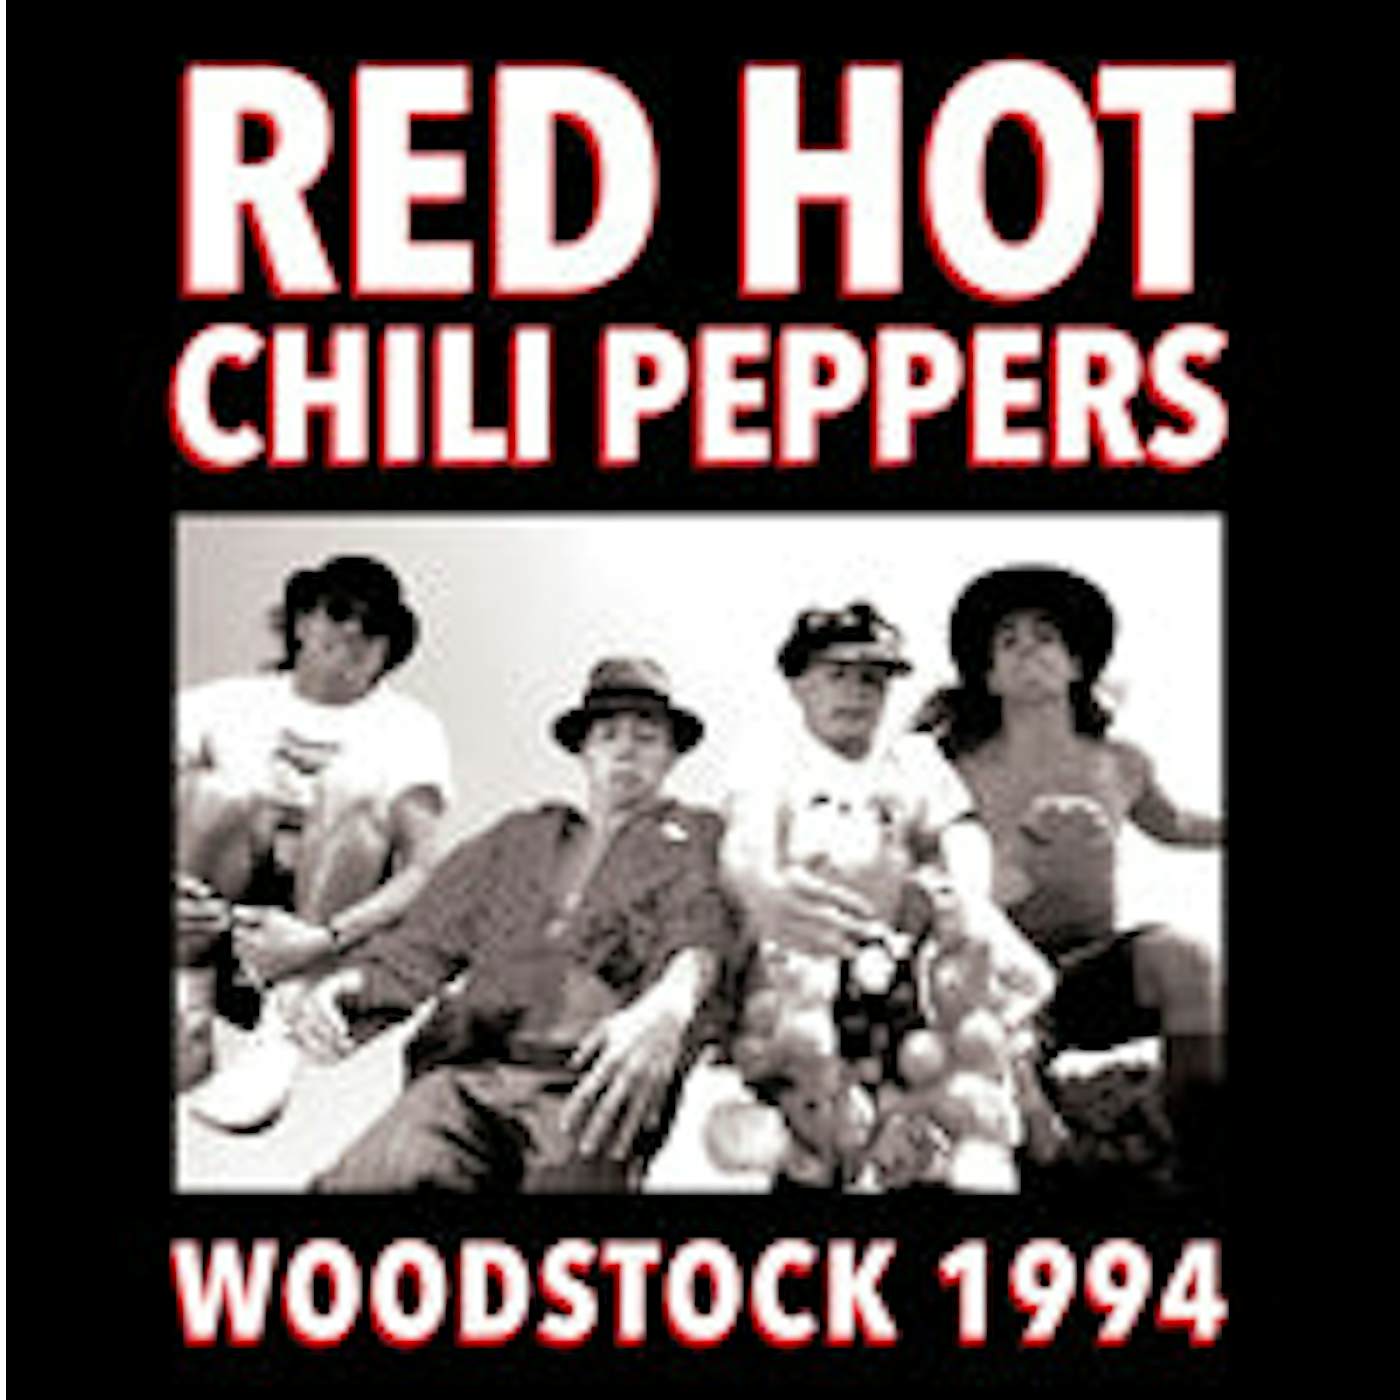 Red Hot Chili Peppers LP - Woodstock 1994 (Vinyl)